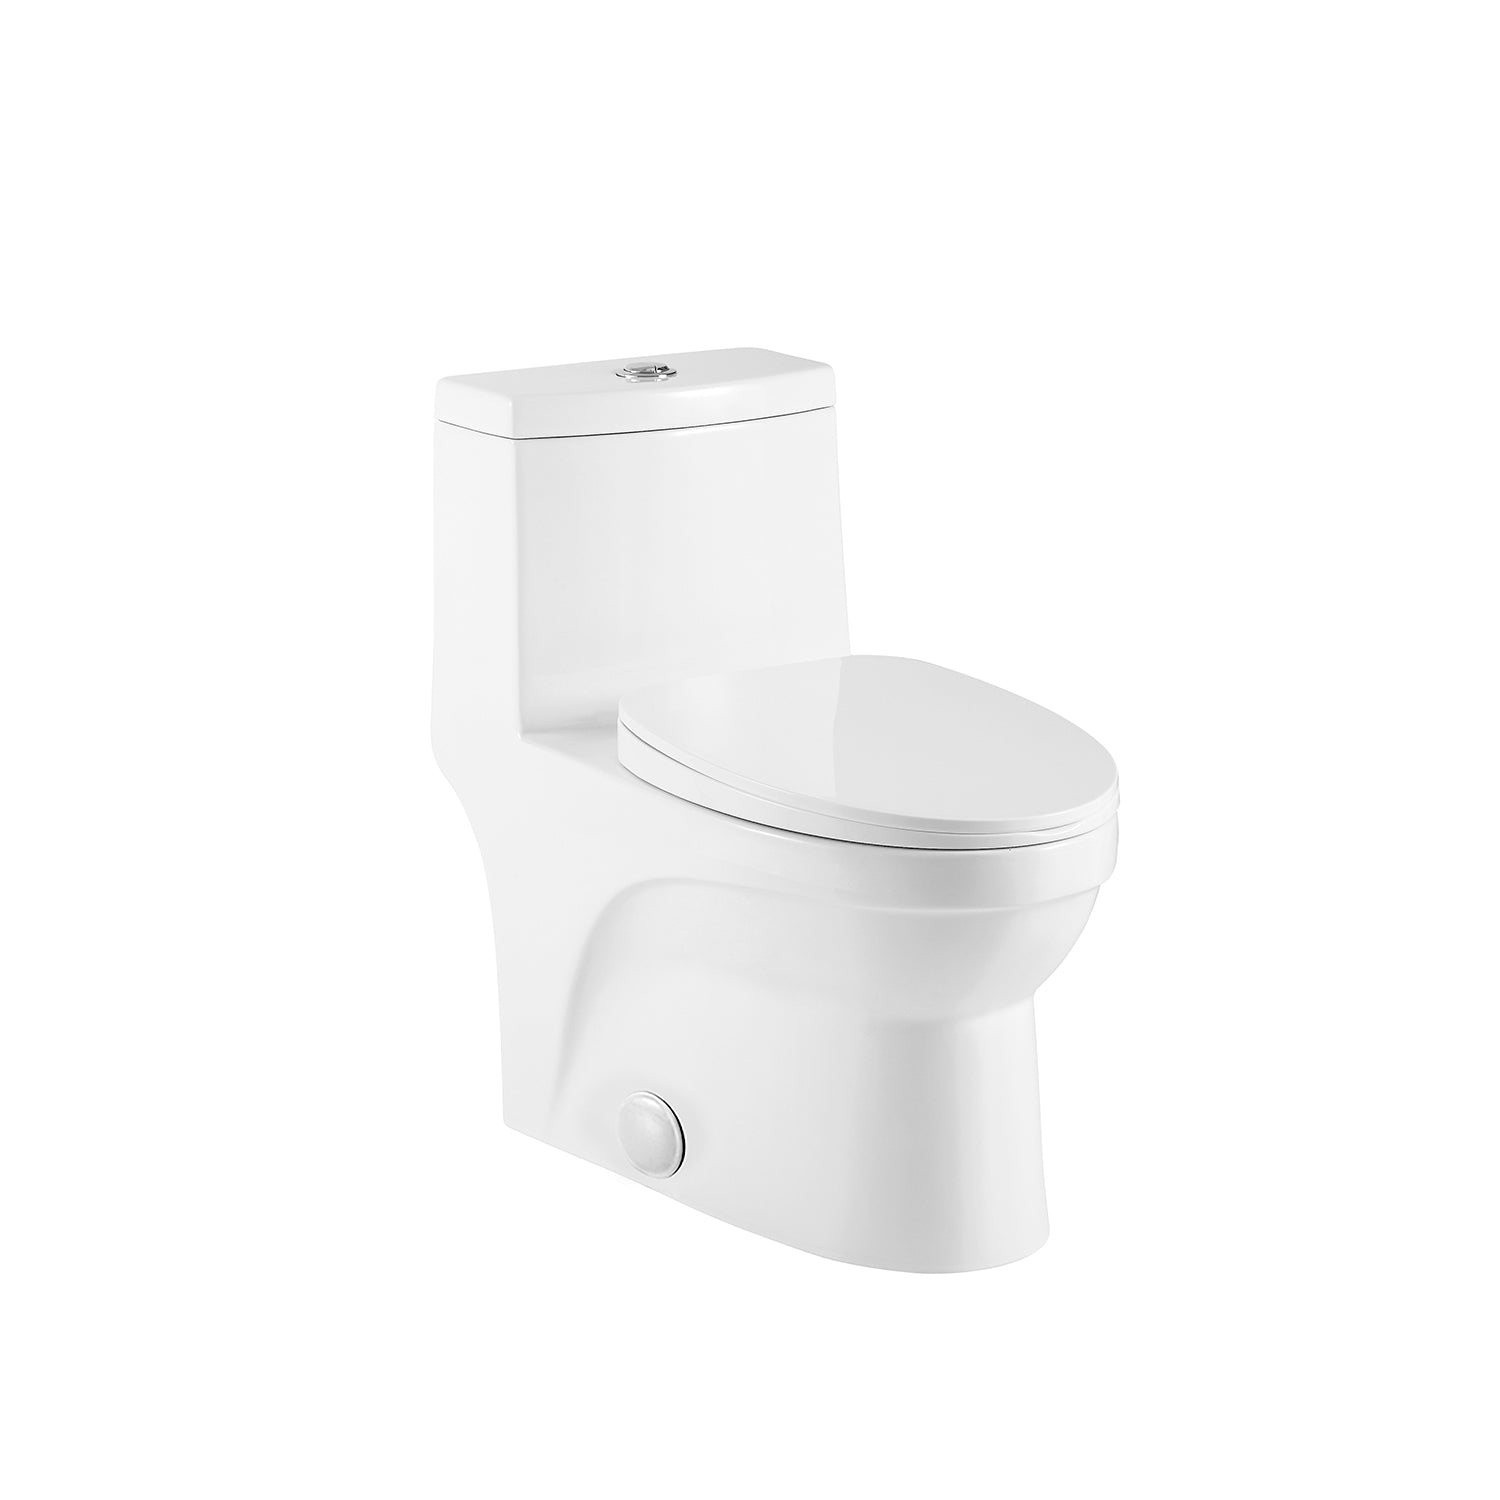 DAX One Piece Oval Toilet with Soft Closing Seat and Dual Flush High-Efficiency, Porcelain, White Finish, Height 16-9/16 Inches (BSN-CL12050A)